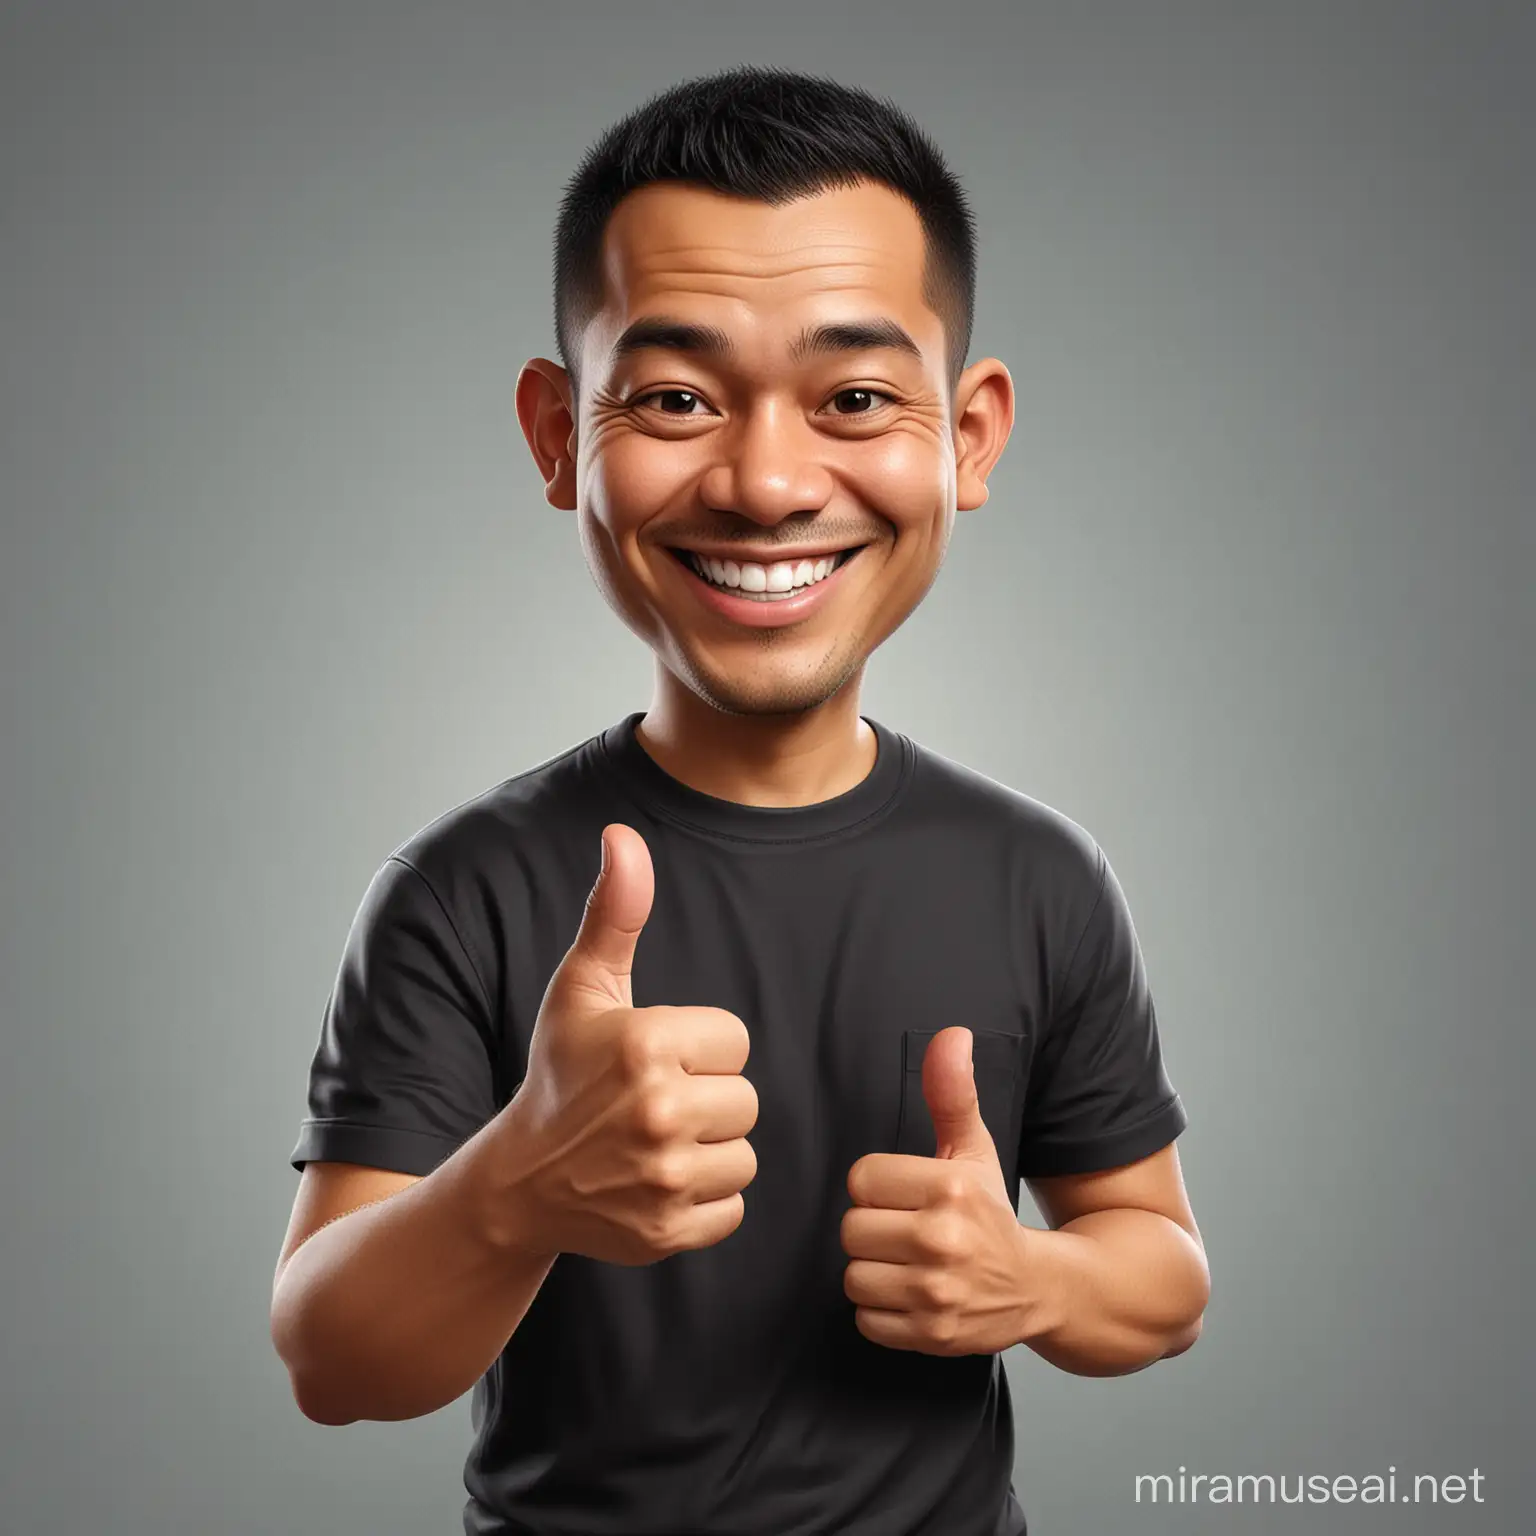 Cheerful Indonesian Man Giving Thumbs Up in Caricature Portrait